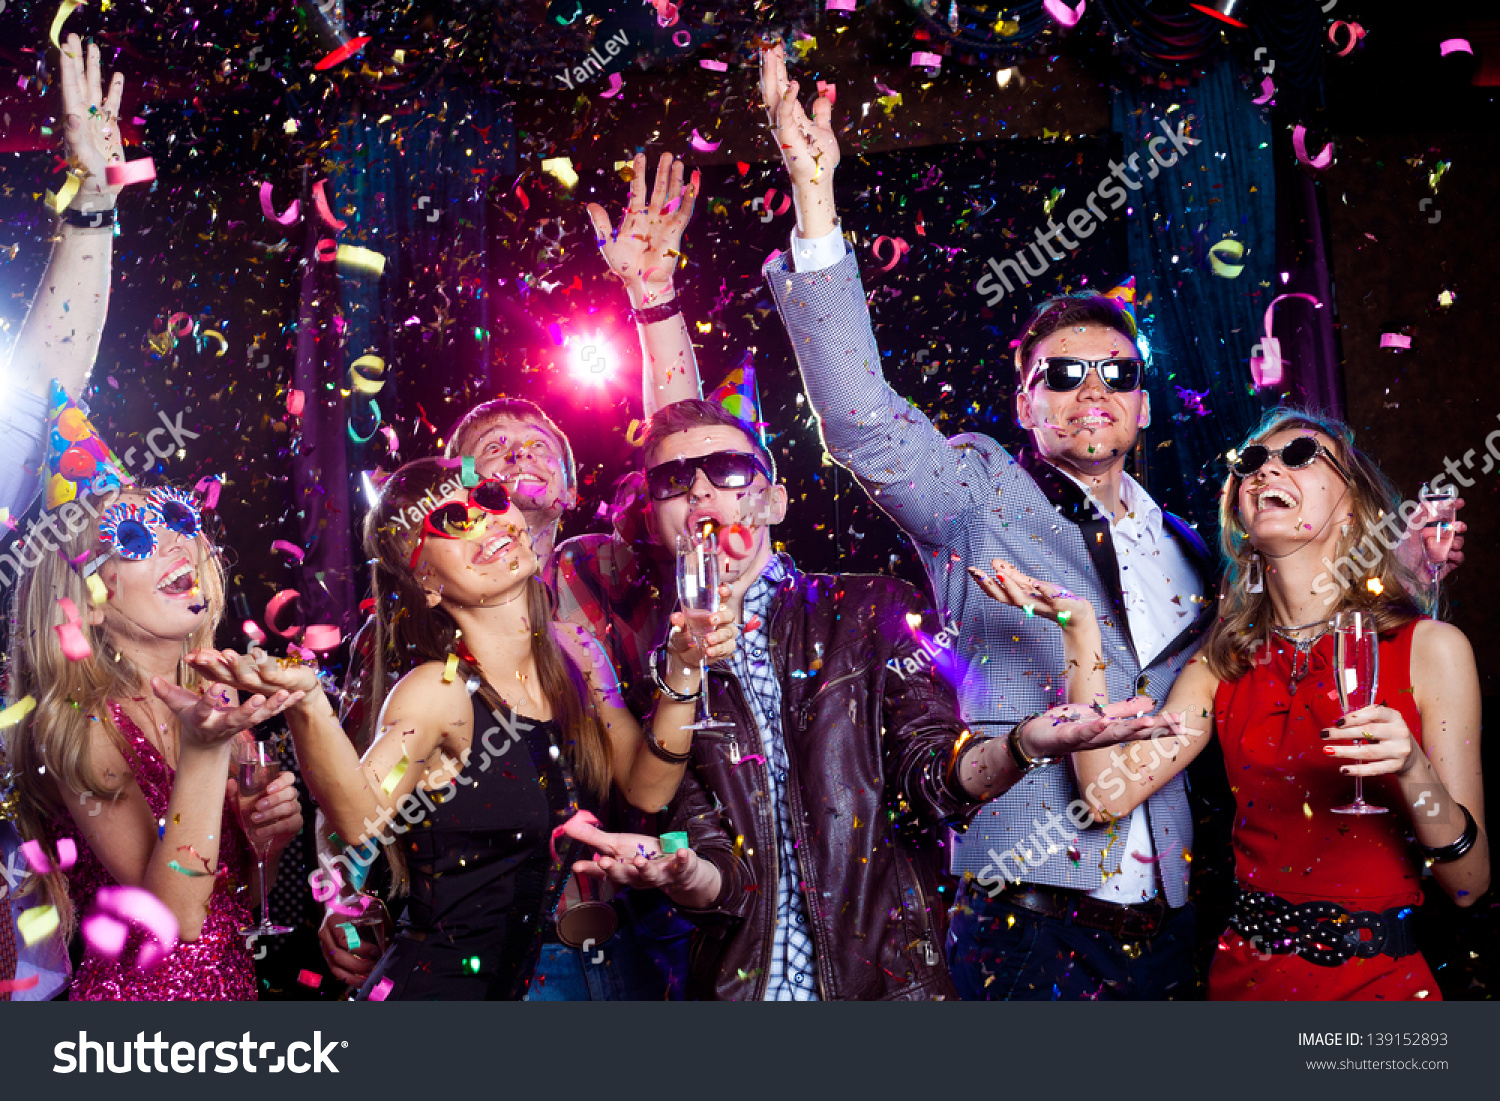 Cheerful young people showered with confetti on a club party. #139152893